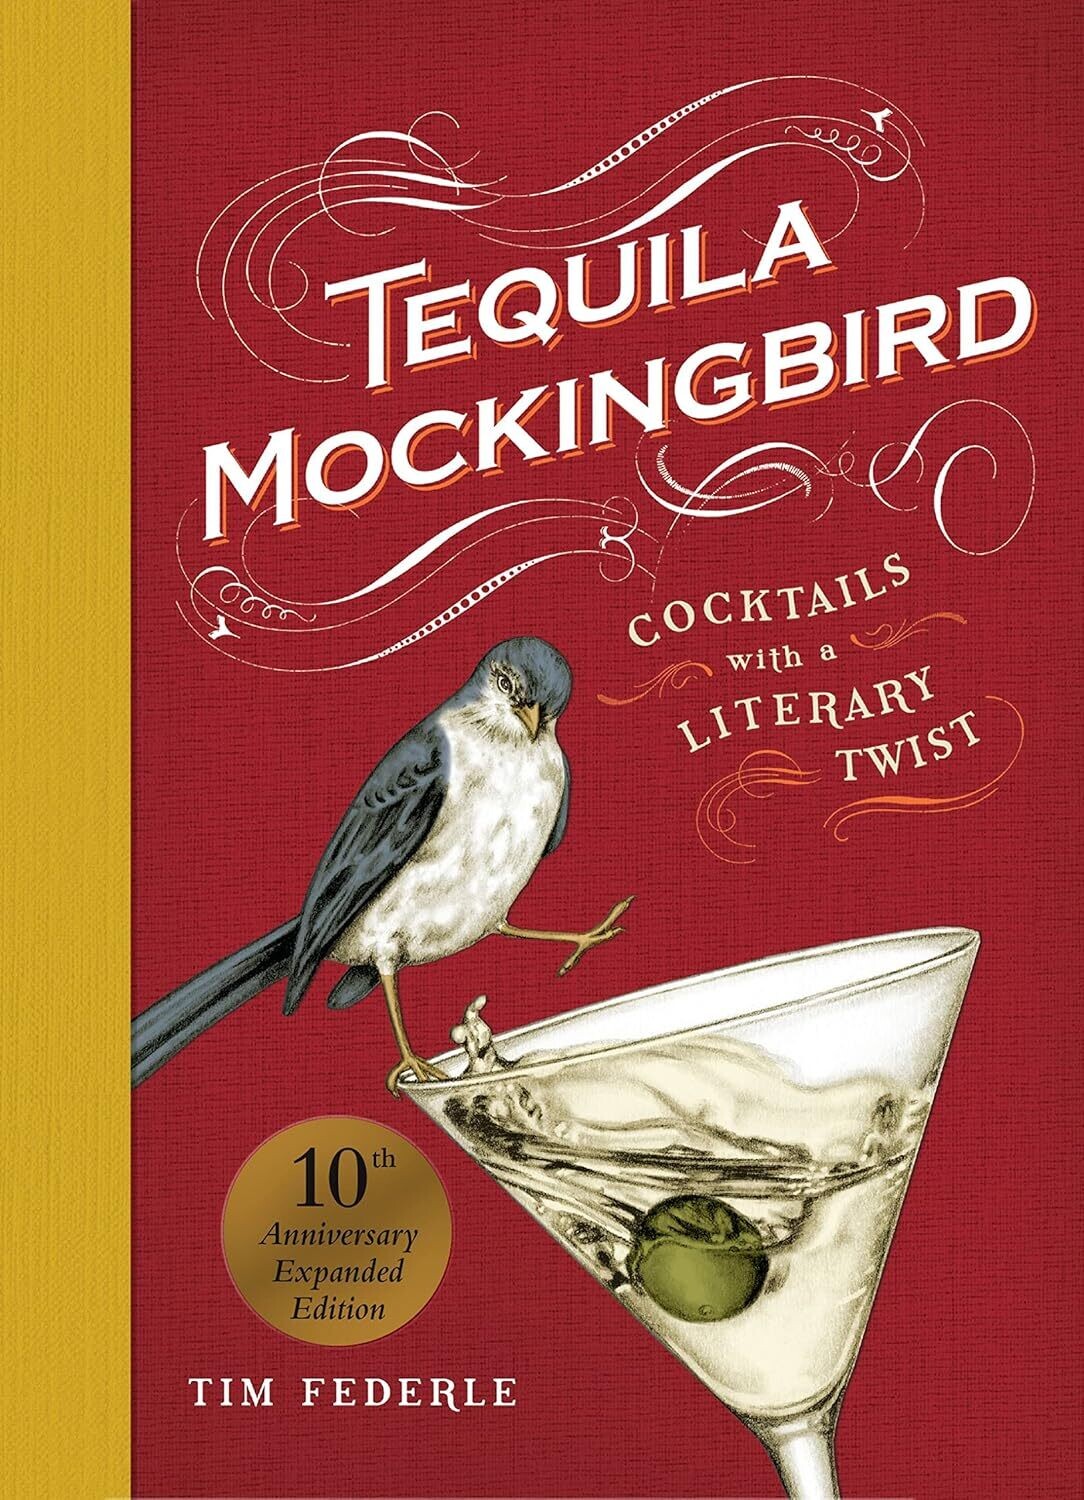 Tequila Mockingbird - Cocktails with a Literal Twist